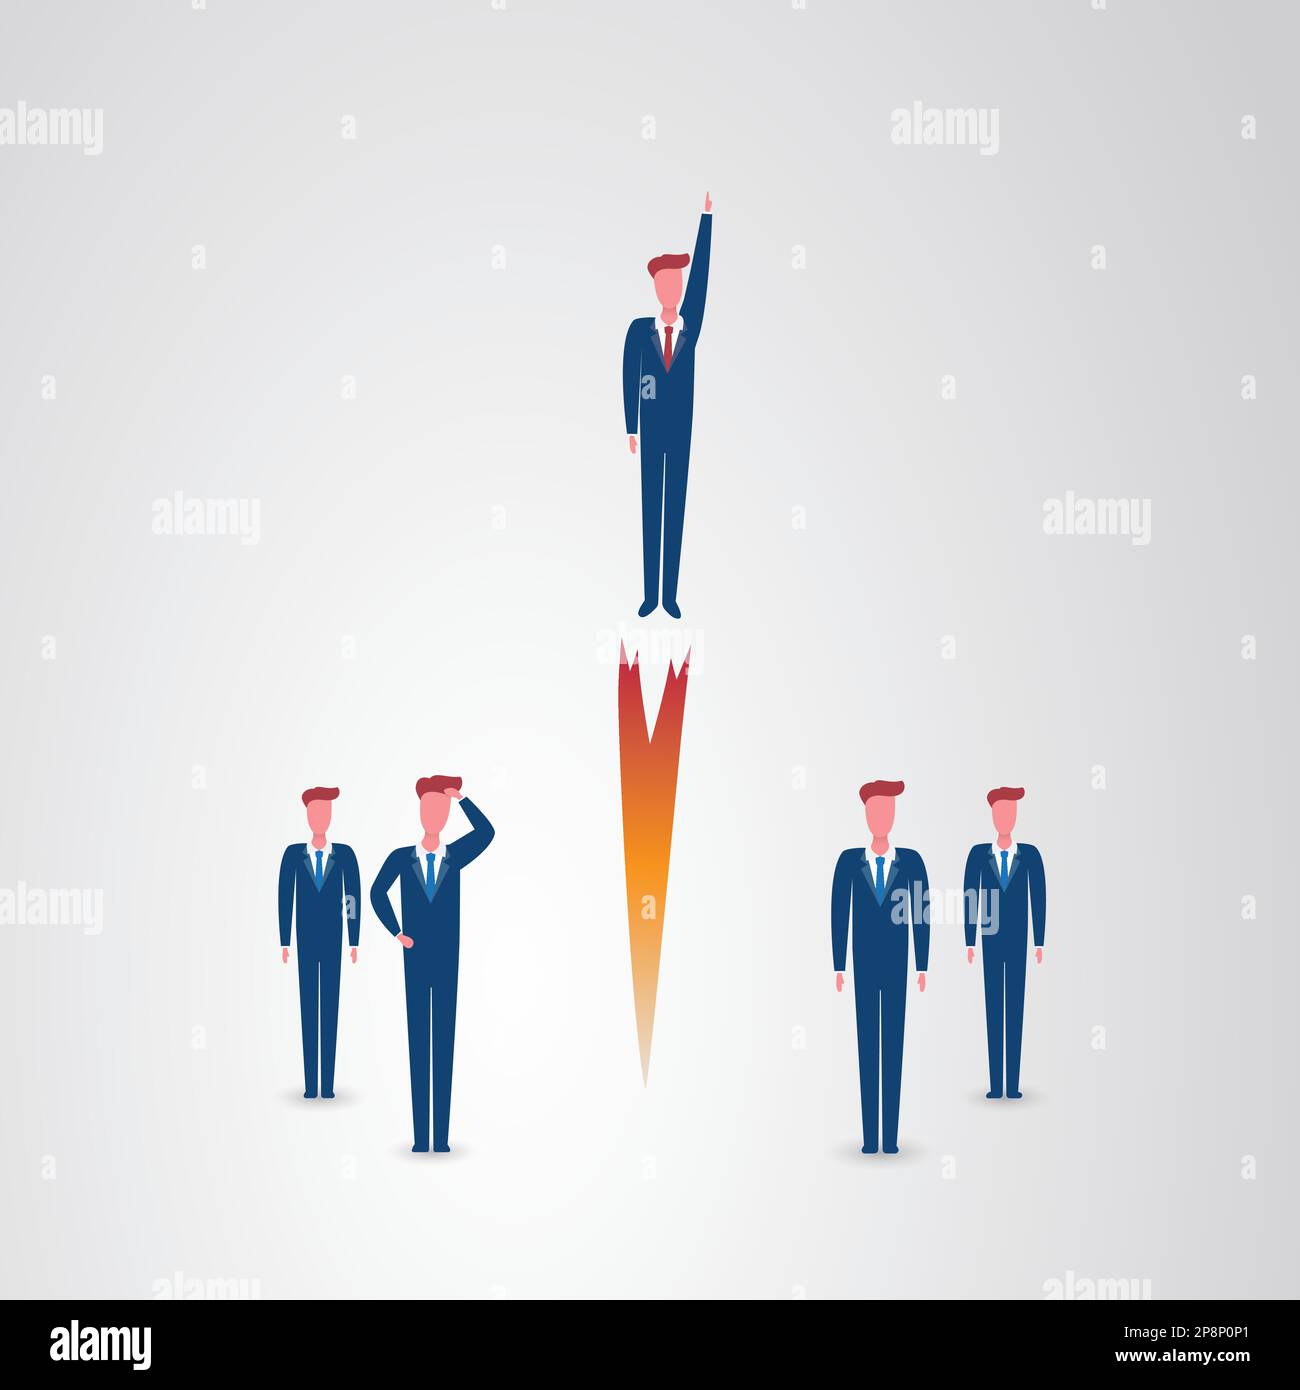 Boost Your Career - Career Development Design Concept with Businessman Flying High Stock Vector